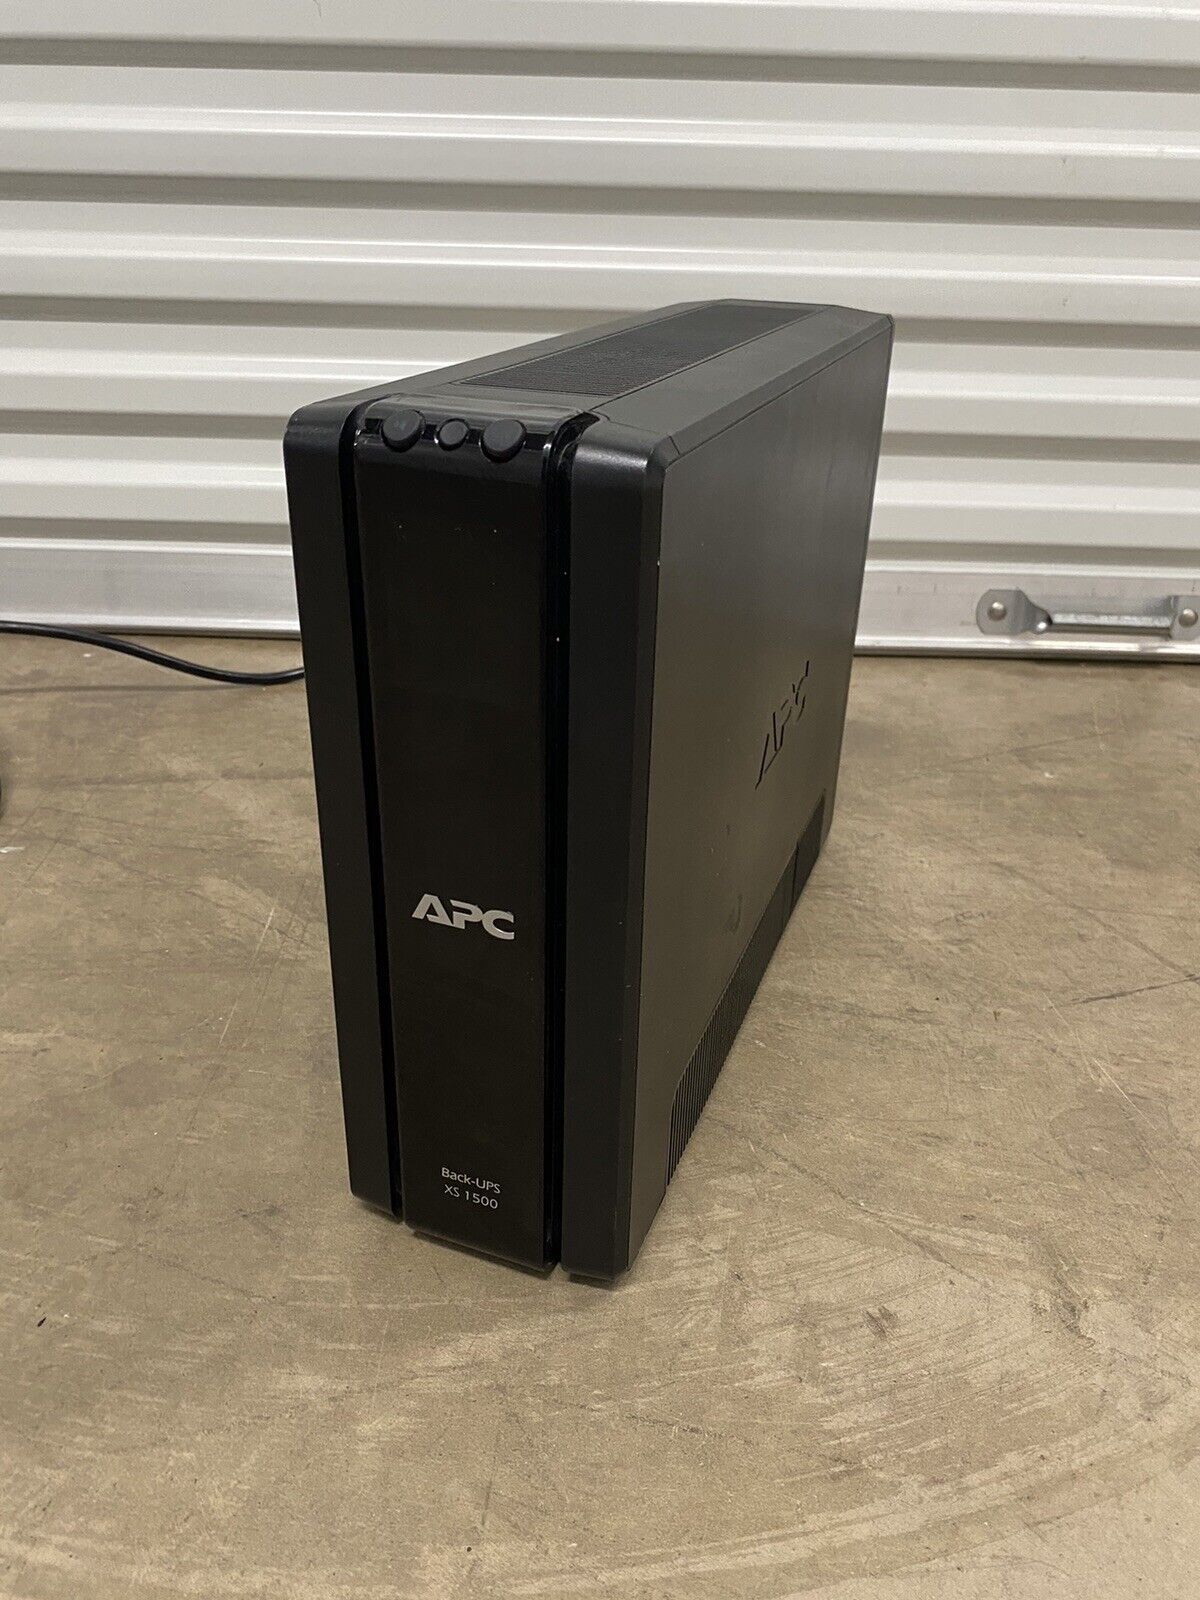 APC BACK UPS XS1500 BX1500G 10 Outlets UPS Power Supply No Battery Tested Works